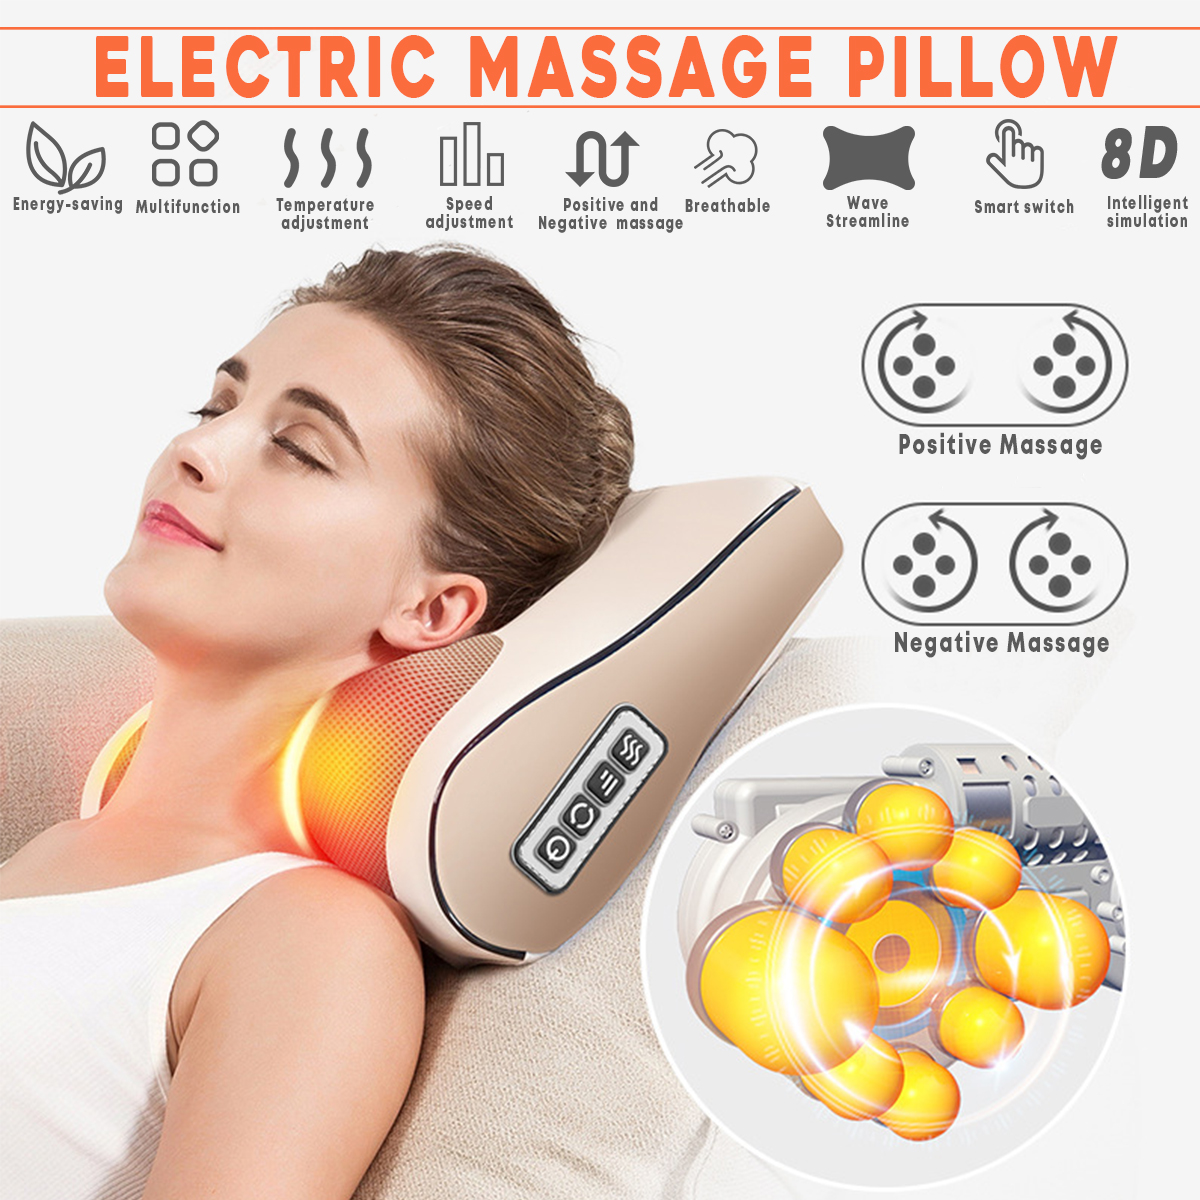 Electric-Massage-Pillow-Infrared-Heating-Neck-Shoulder-Back-Body-Massager-Device-1567188-1